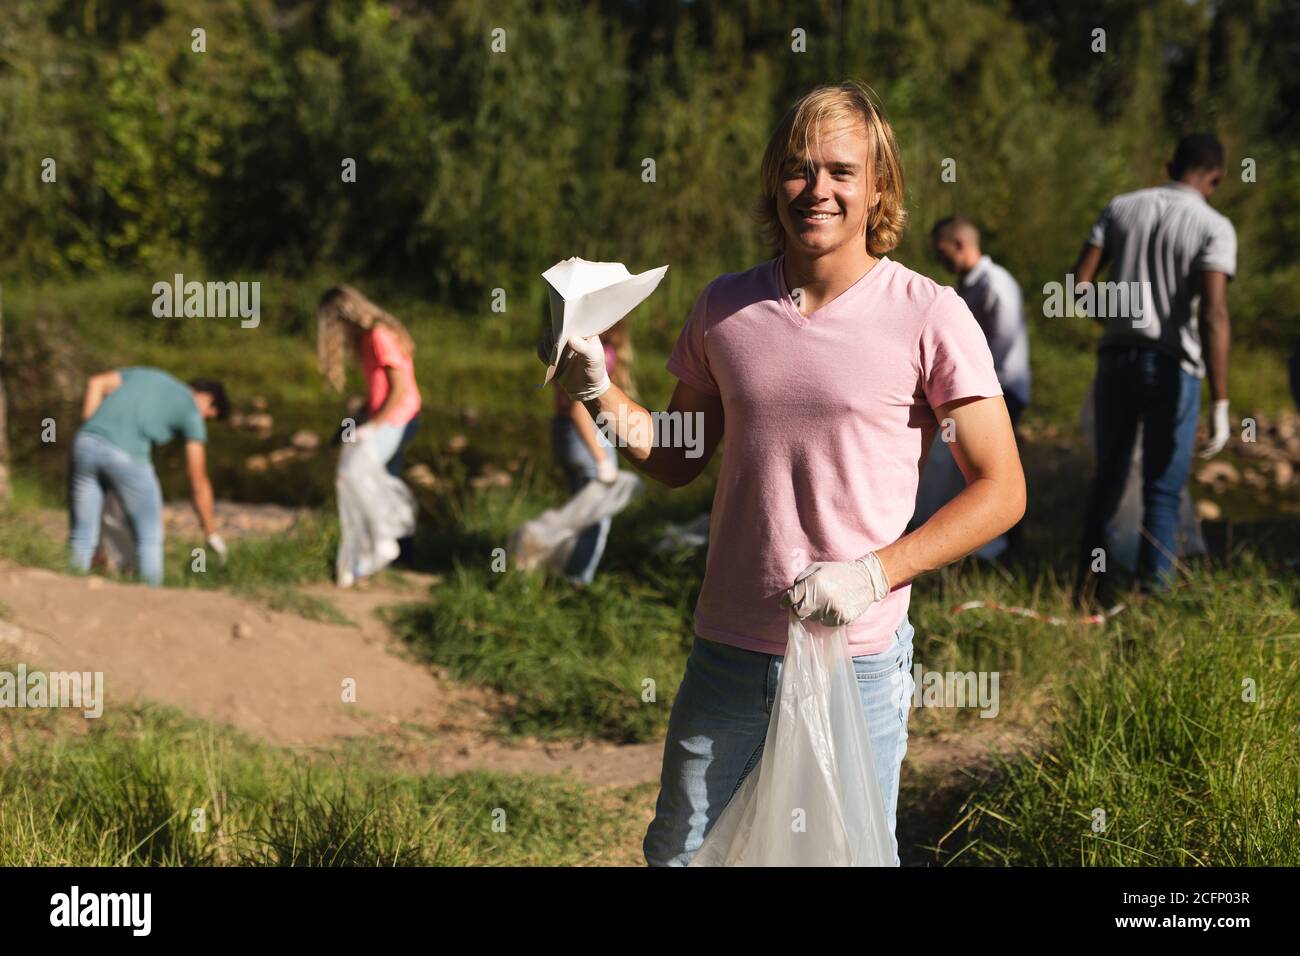 Volunteers cleaning up river in the countryside Stock Photo